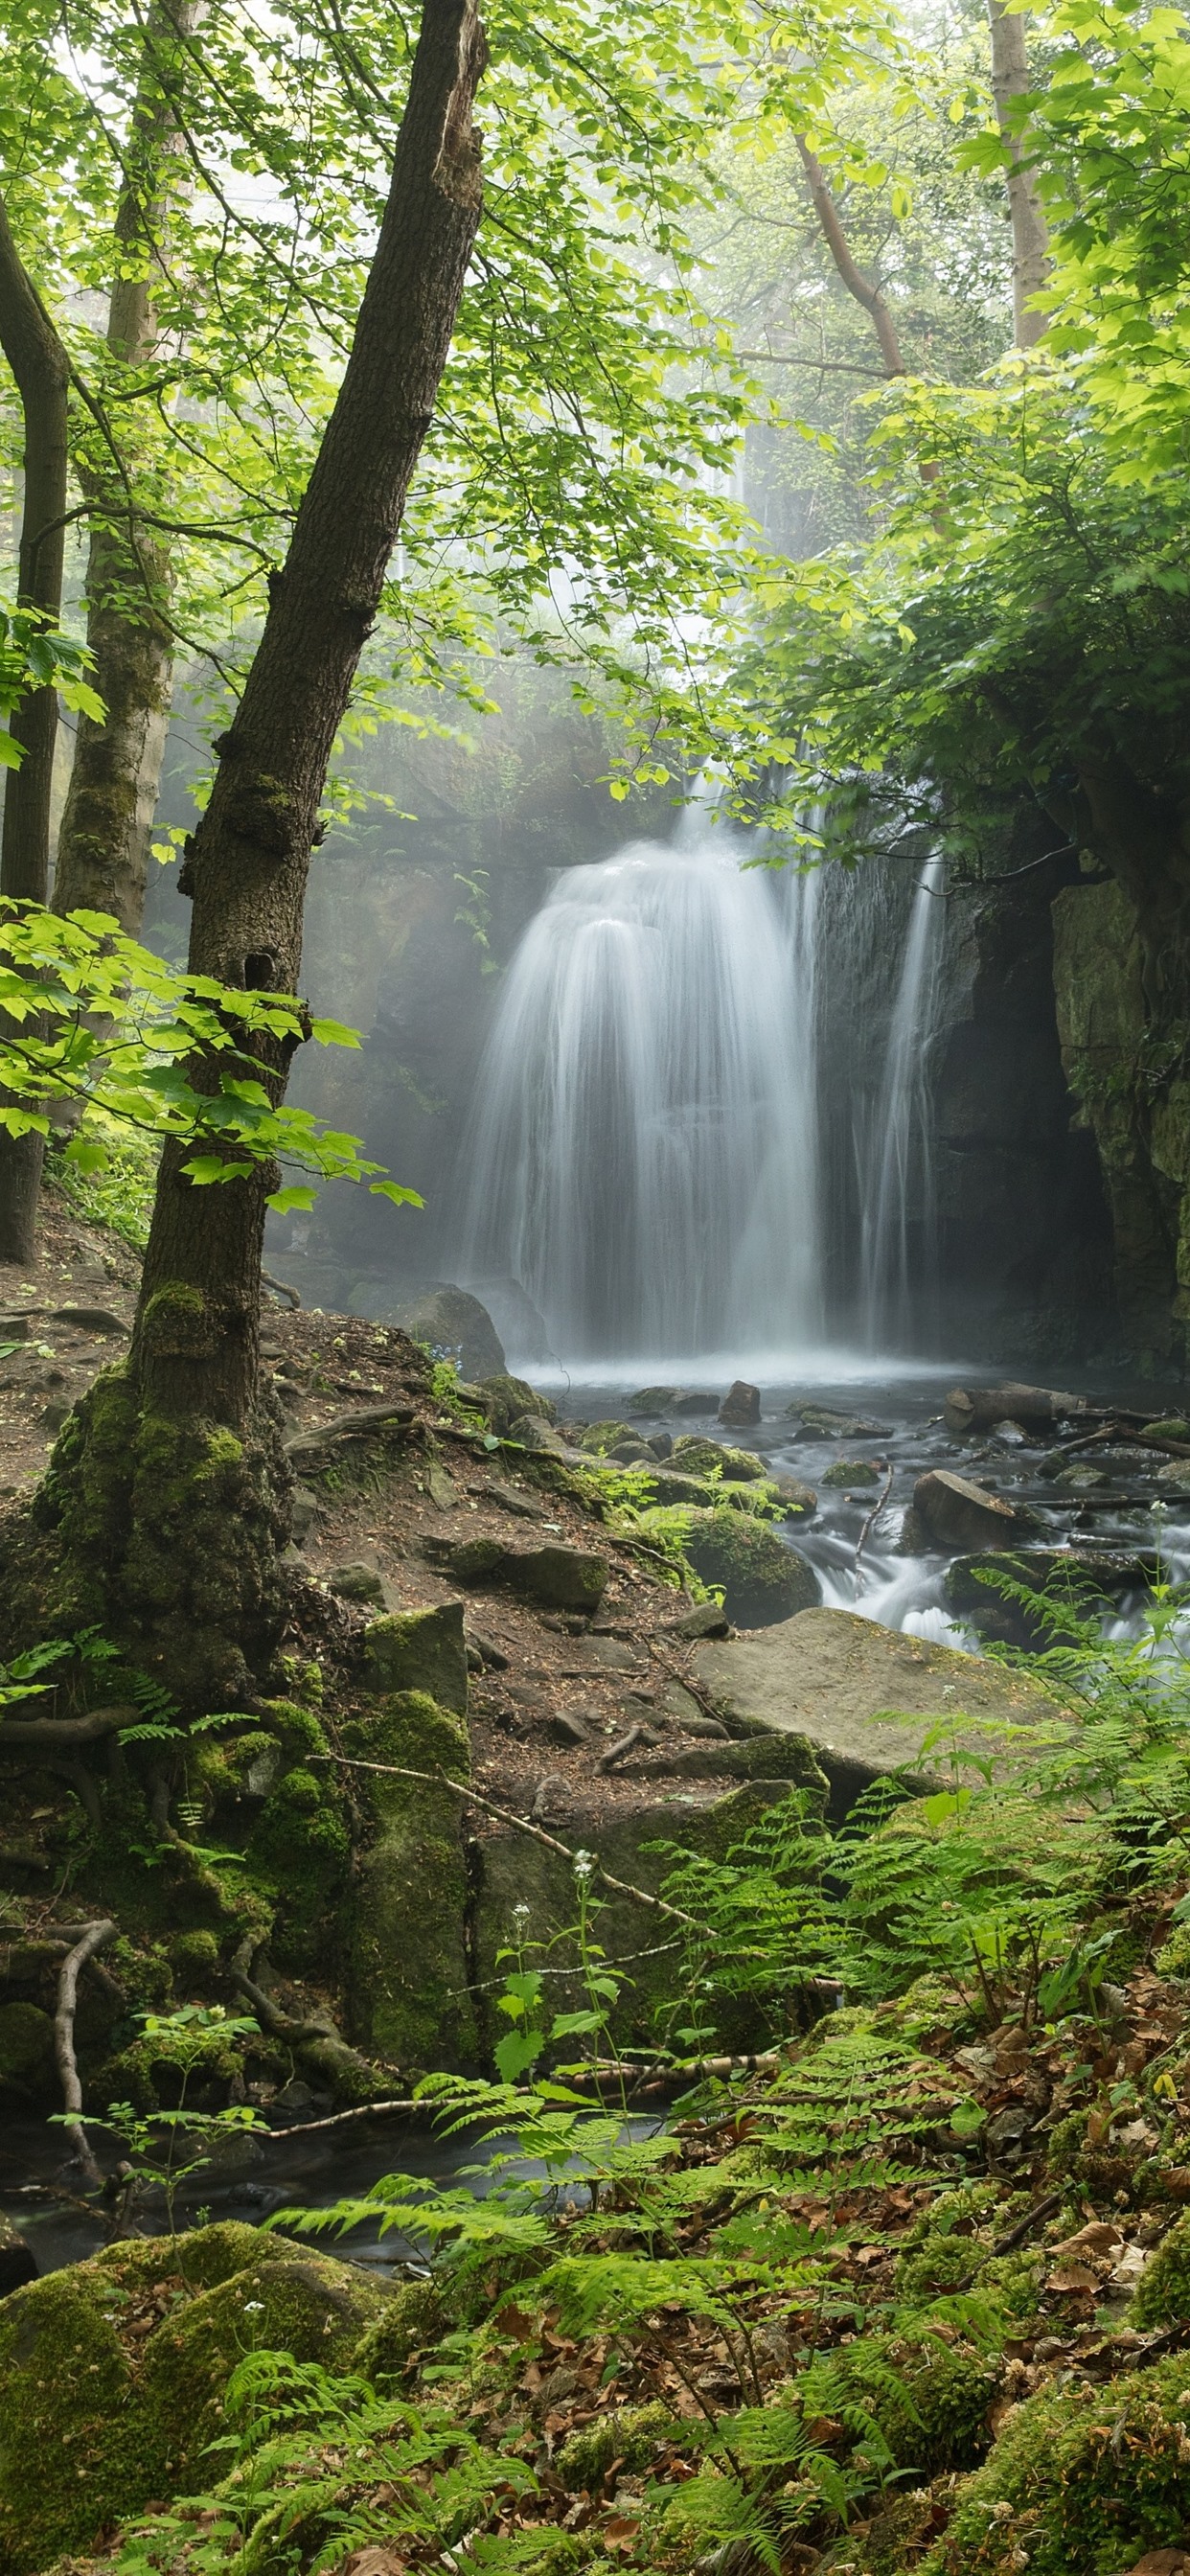 England, Derbyshire, Peak District, Waterfall, Forest 1242x2688 IPhone 11 Pro XS Max Wallpaper, Background, Picture, Image